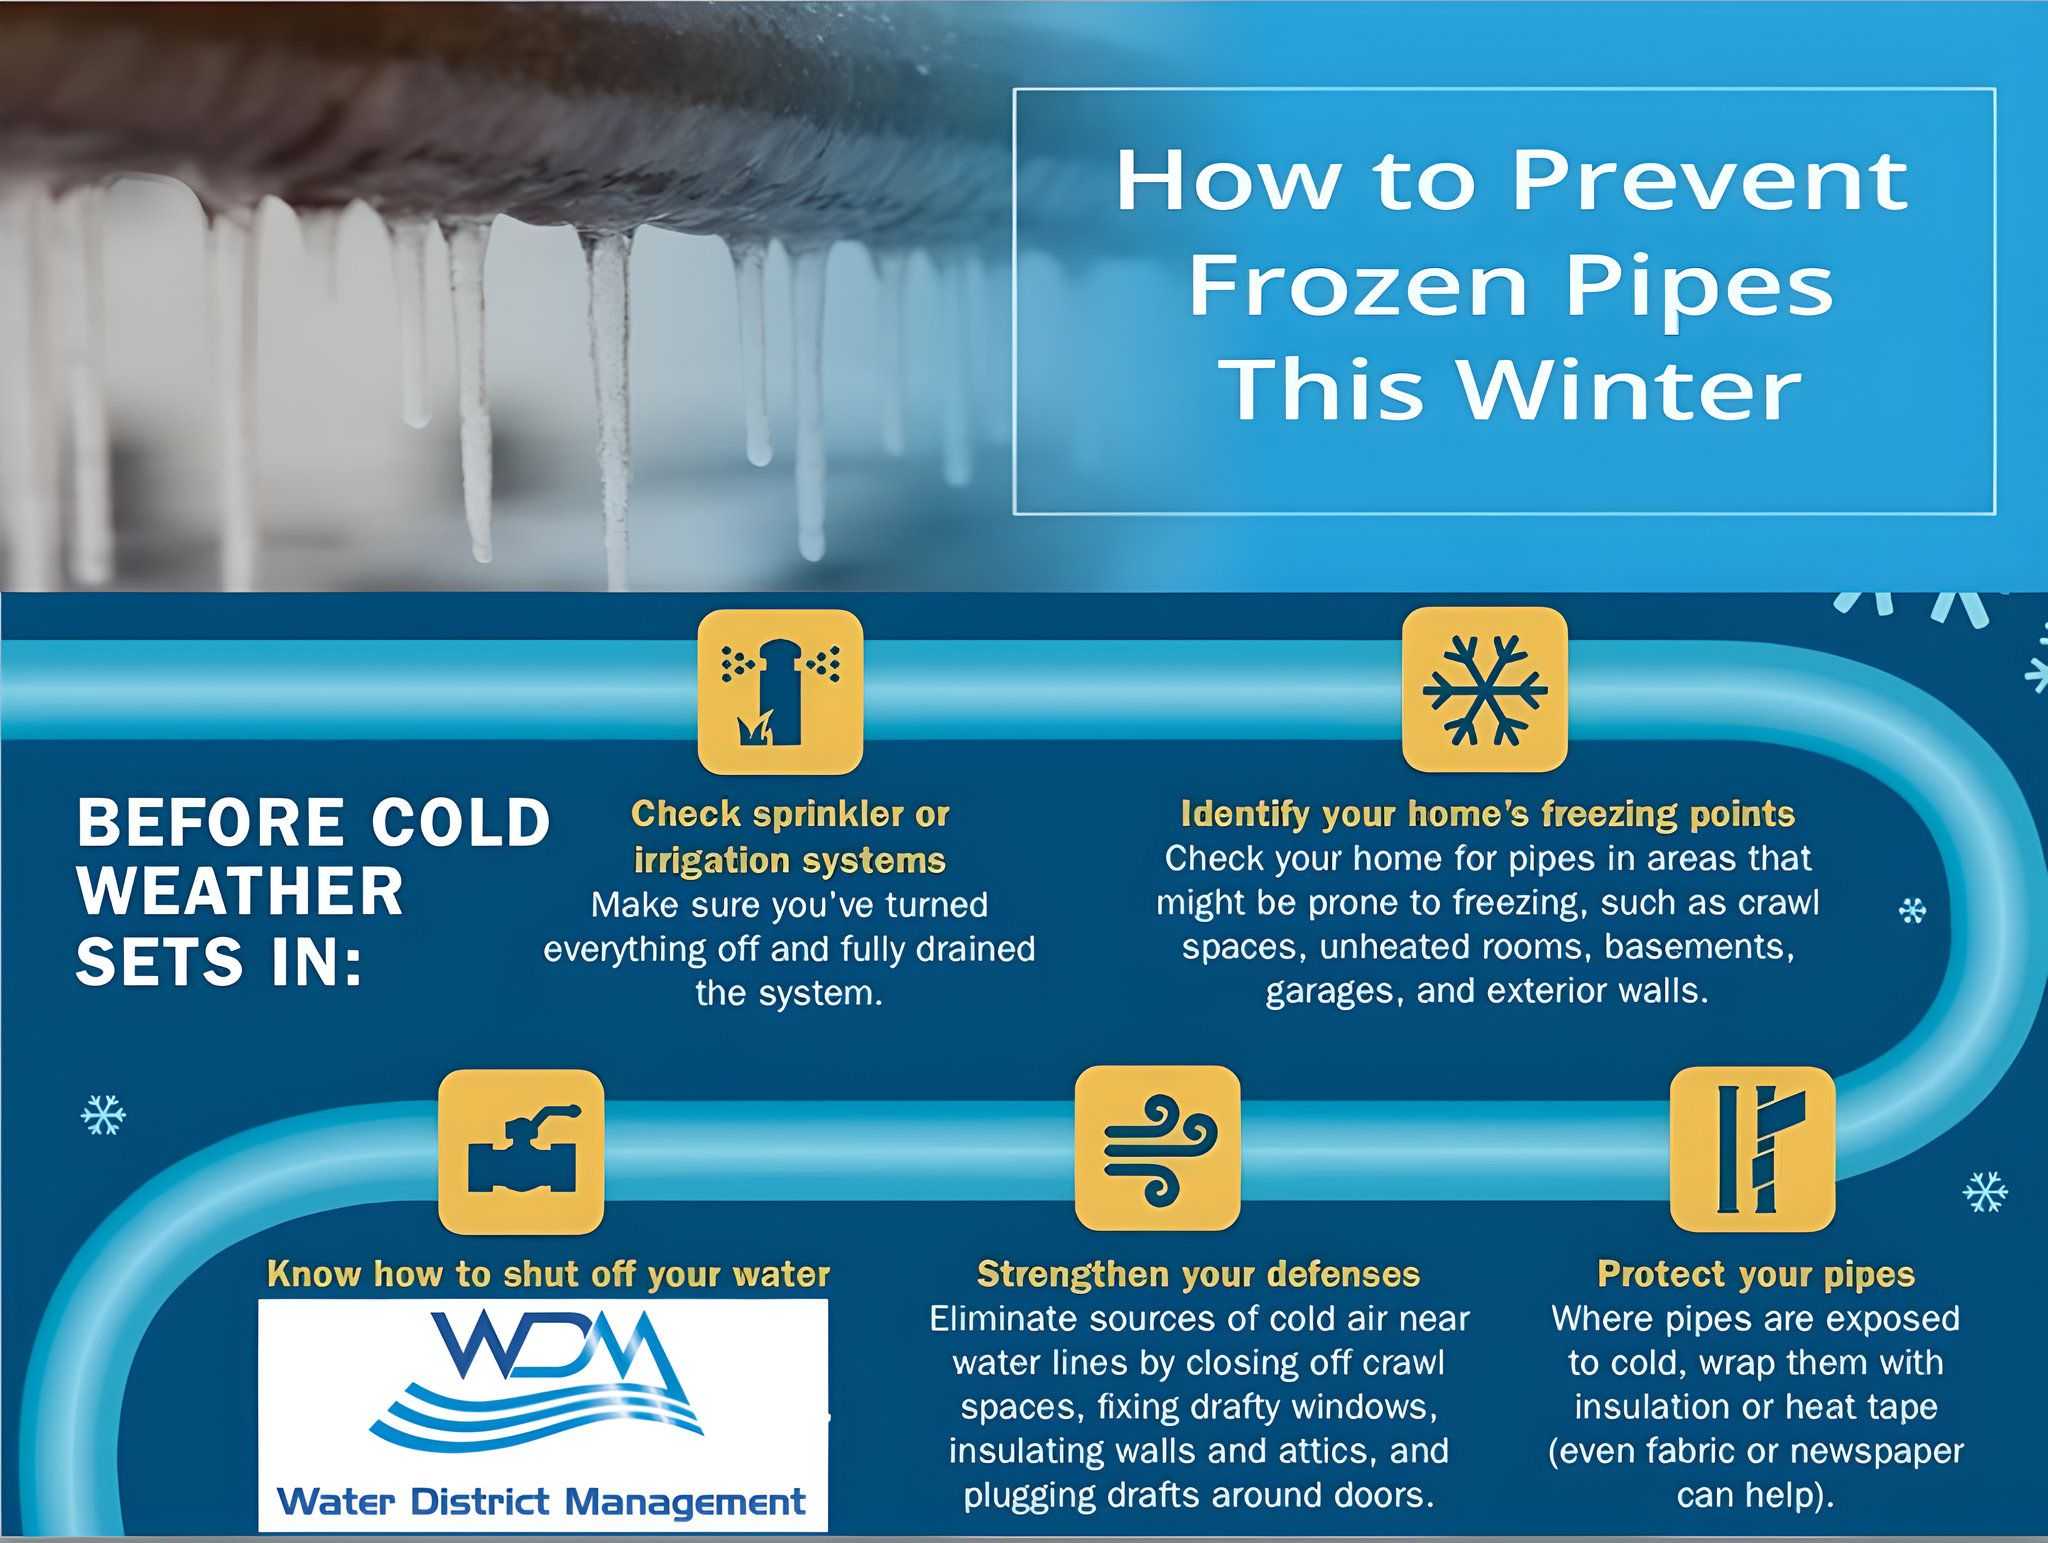 How to Insulate Pipes and Prevent Pipes from Freezing